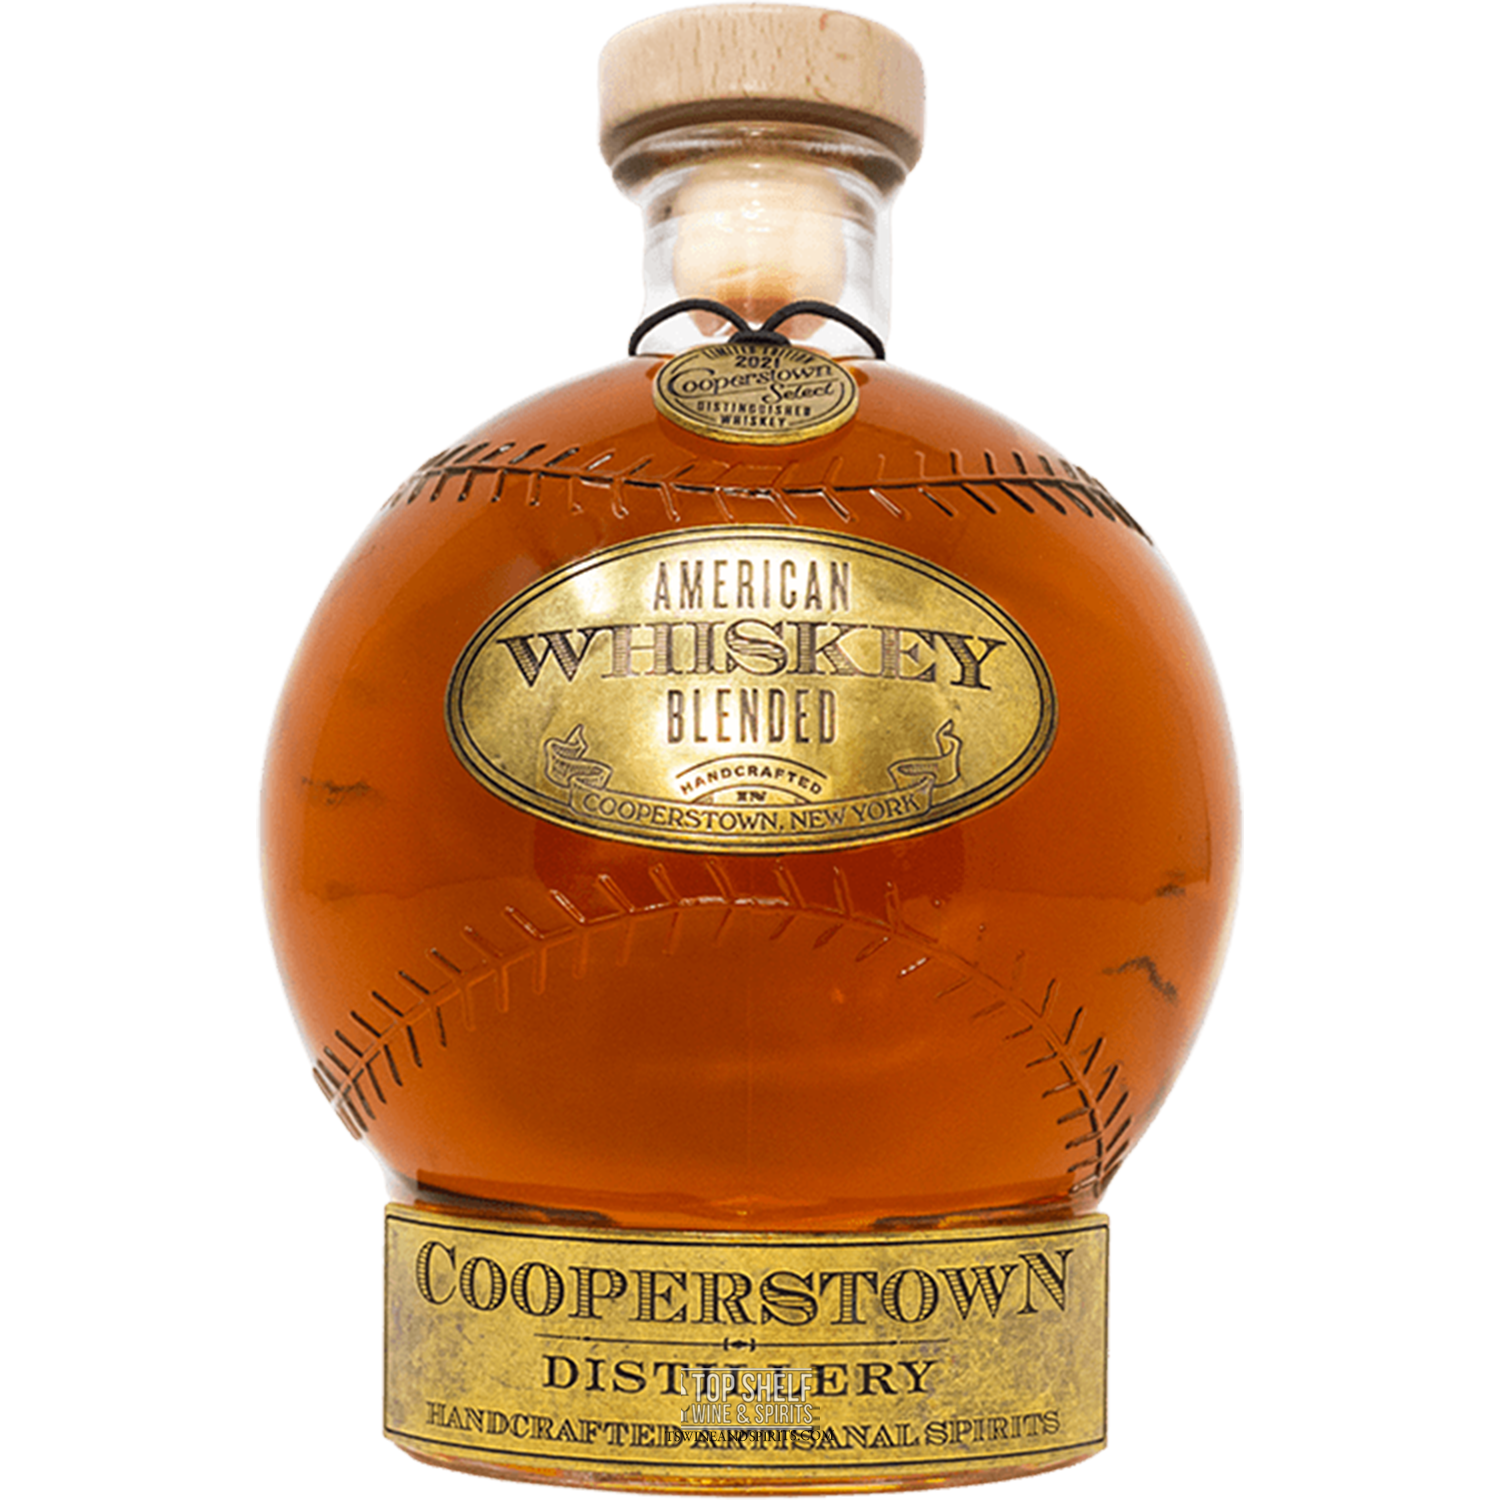 Cooperstown Select American Blended Whiskey (Limited Edition)